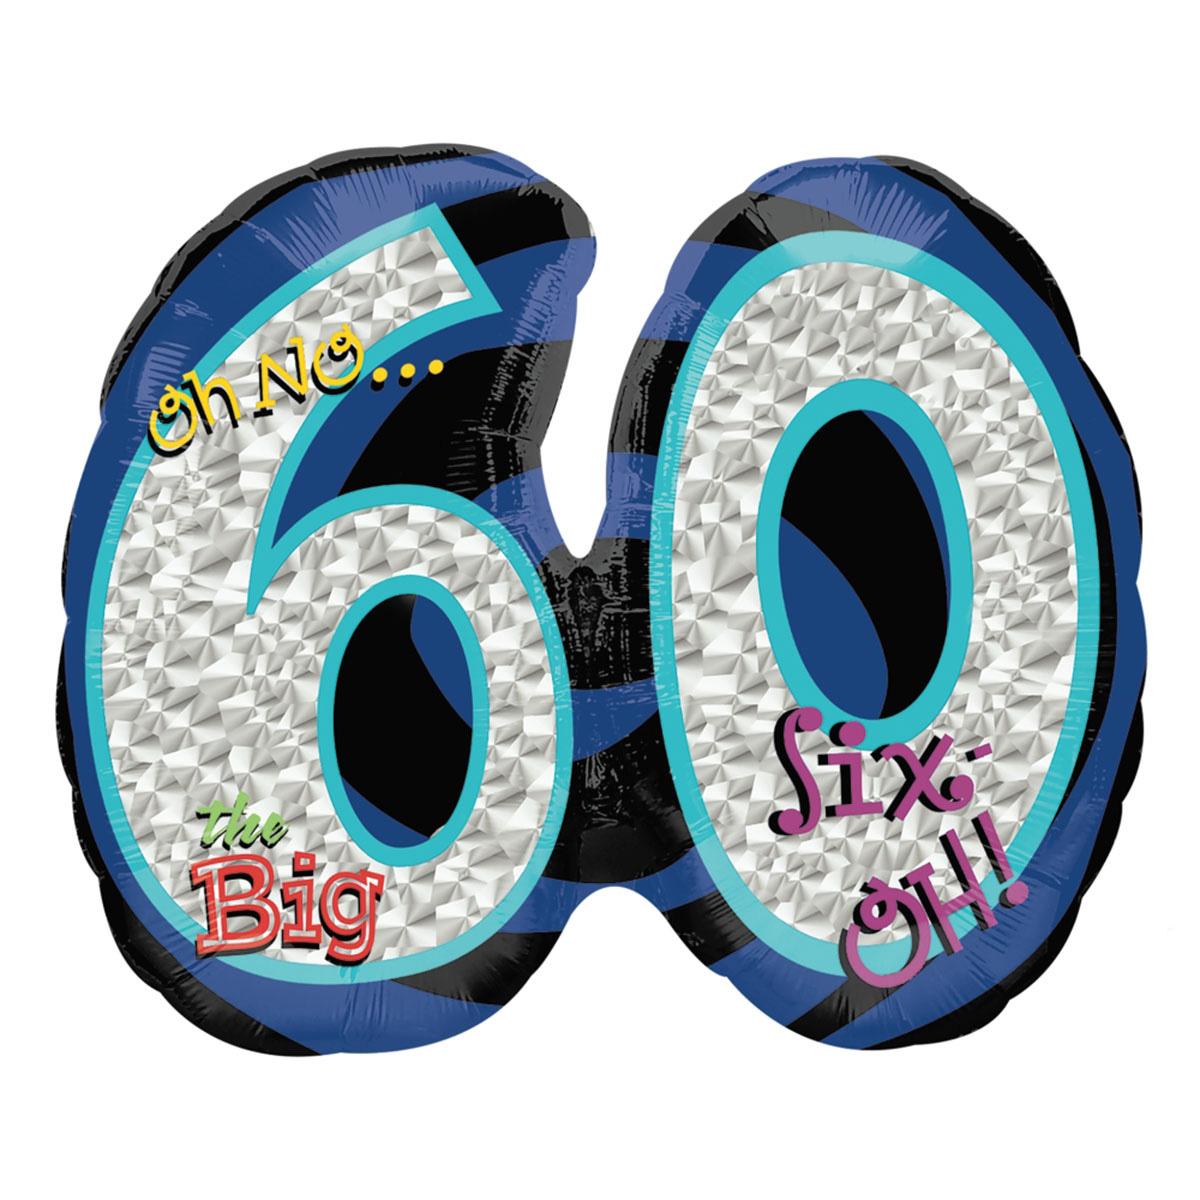 Oh No The Big 60 Holographic Balloon 26 x 21in Balloons & Streamers - Party Centre